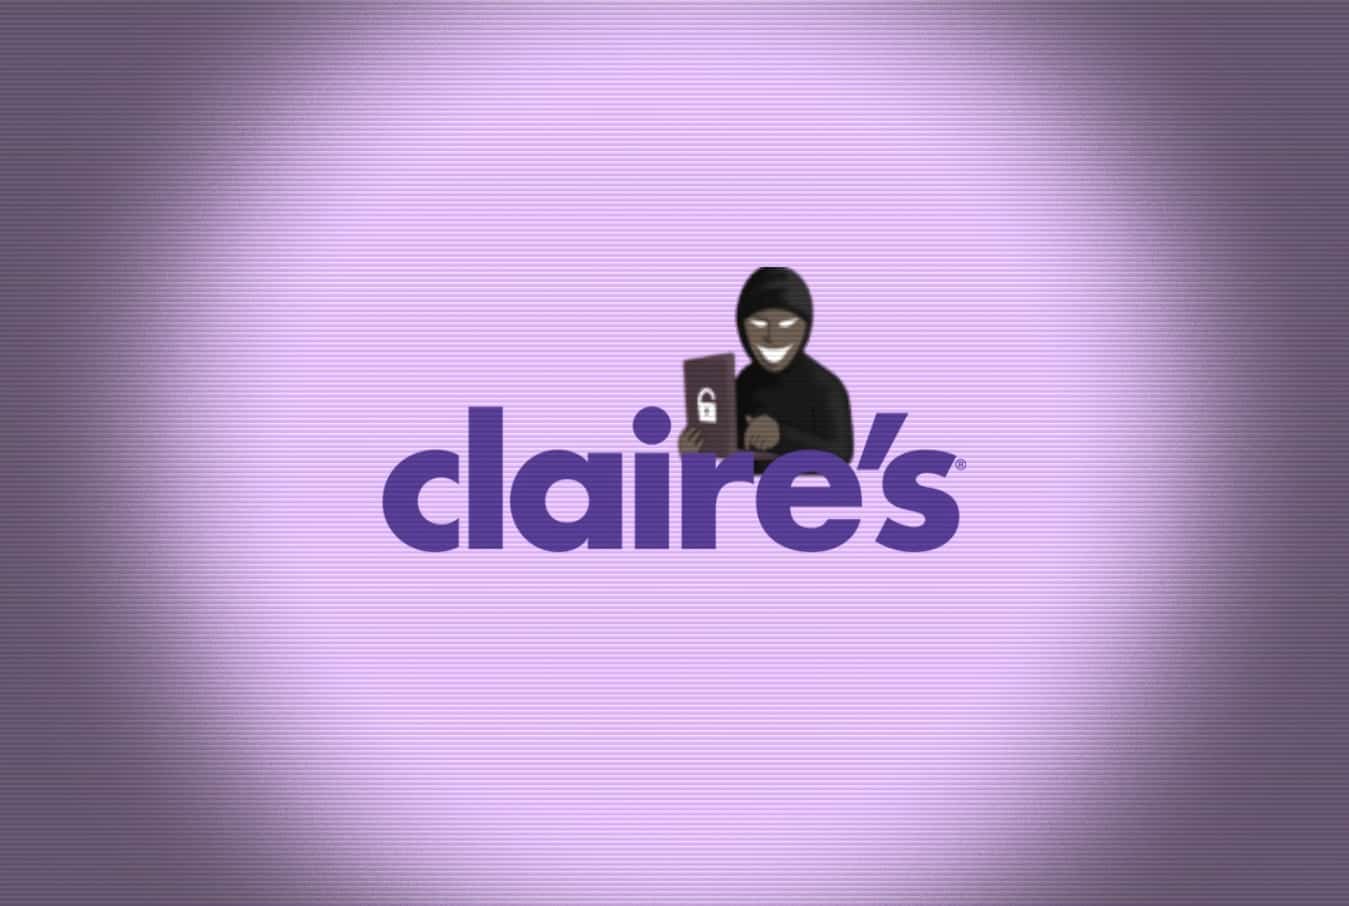 Retail giant Claire's online store hacked after closing 3000 stores